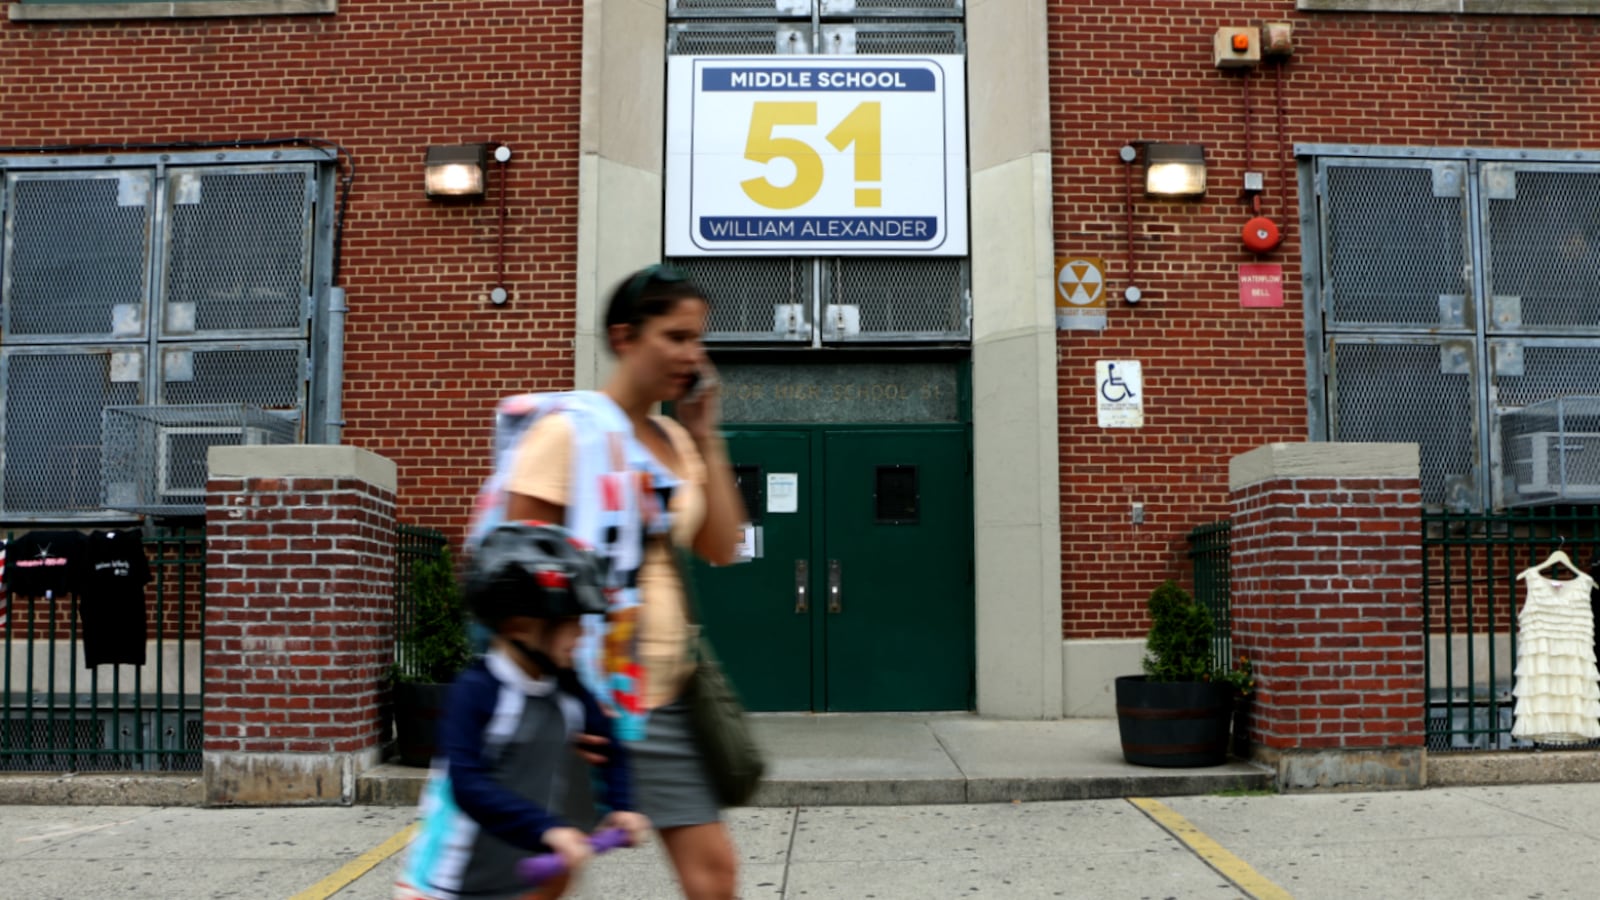 M.S. 51 in Park Slope is one of the most selective middle schools in District 15.